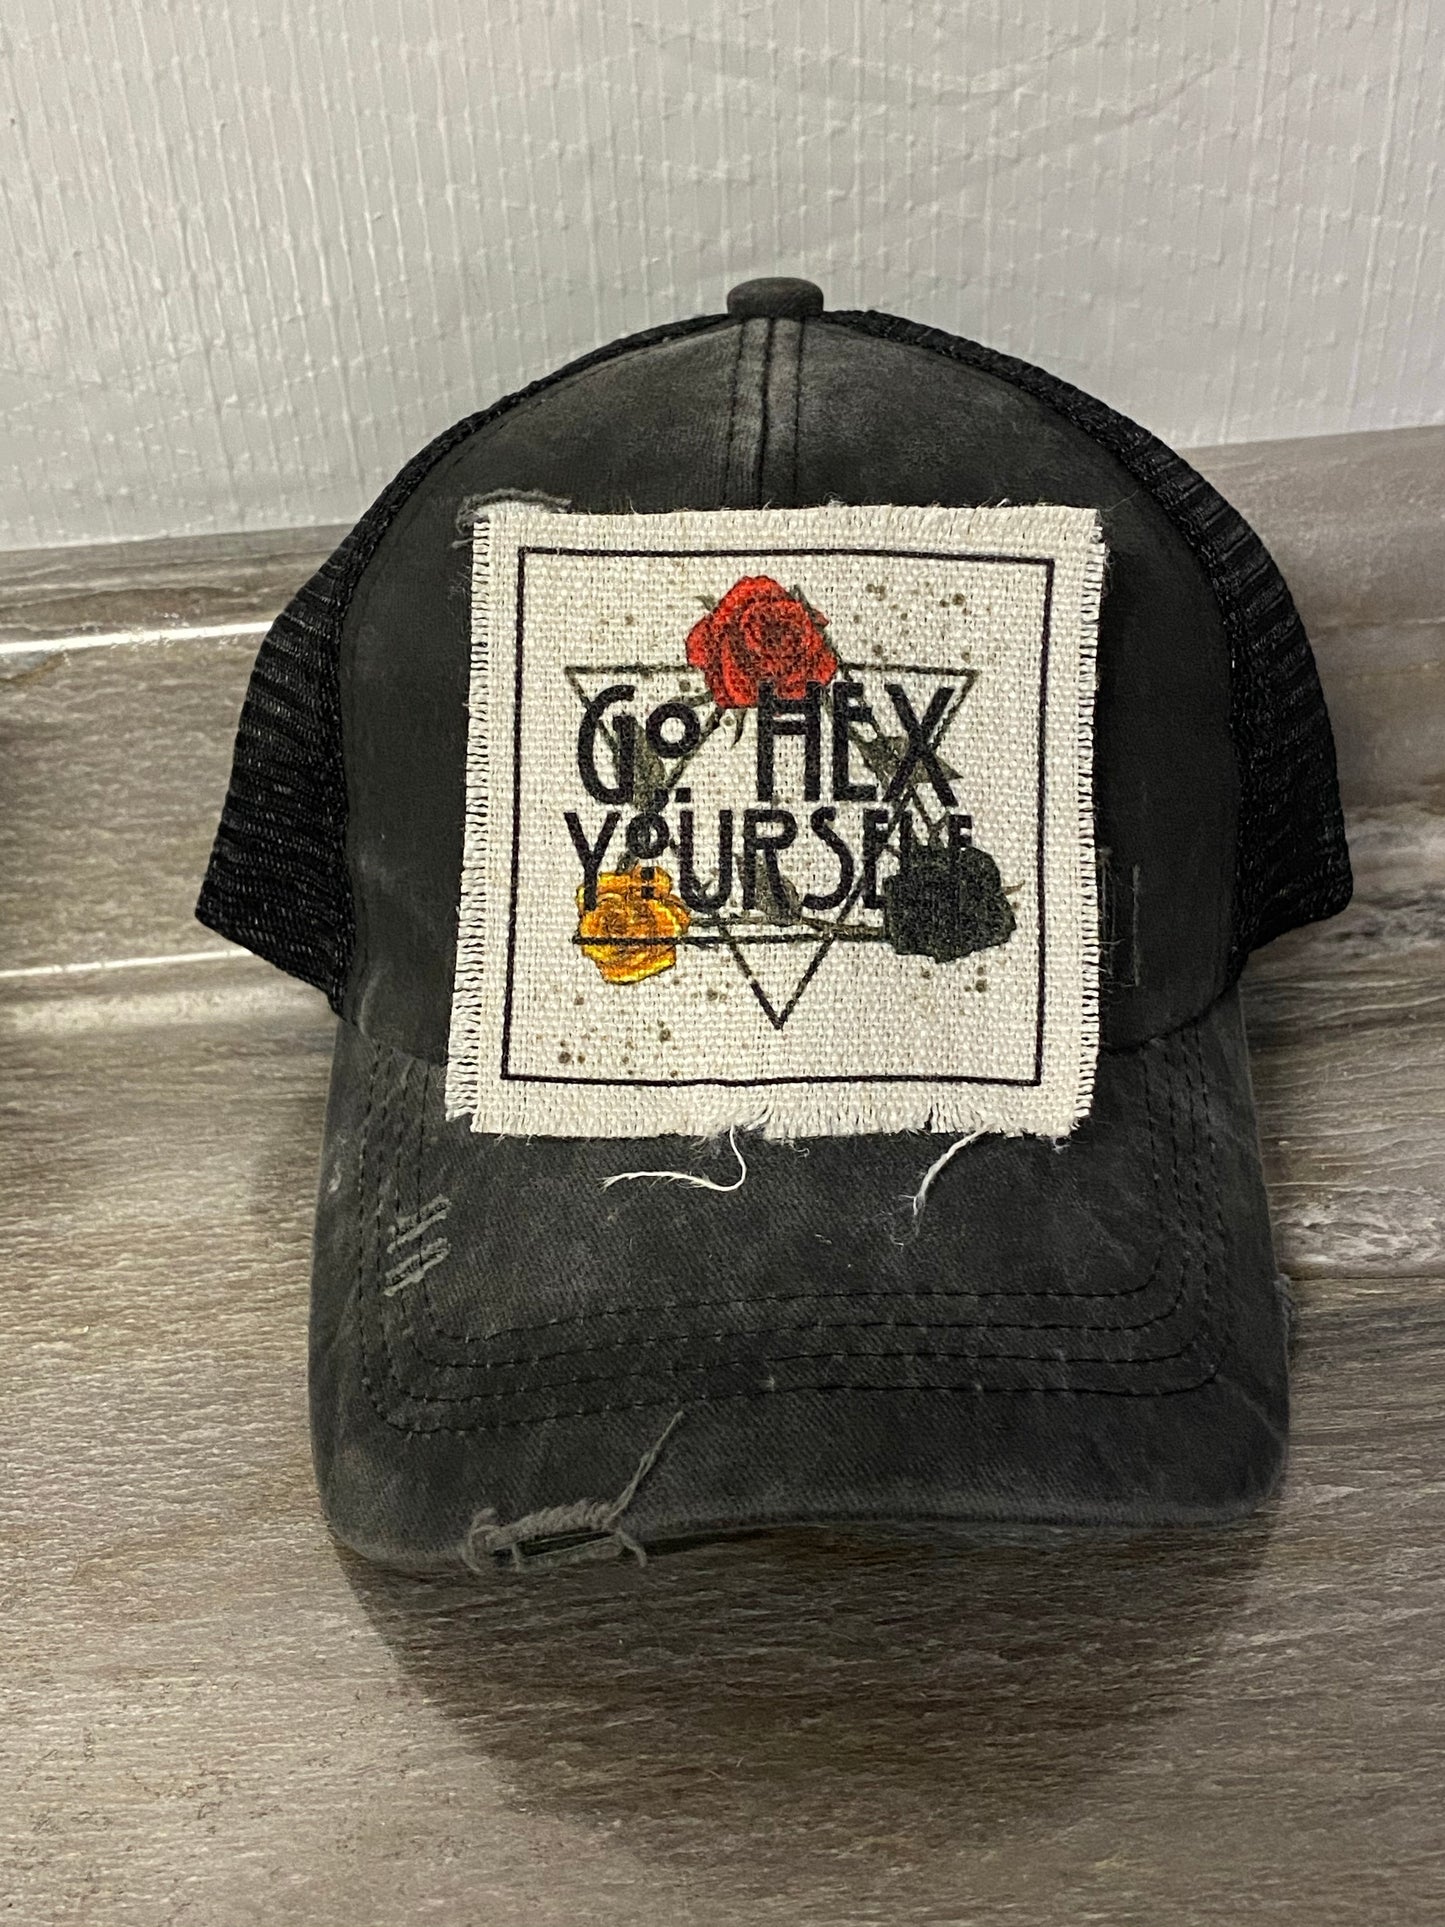 Go Hex Yourself Hat Patch